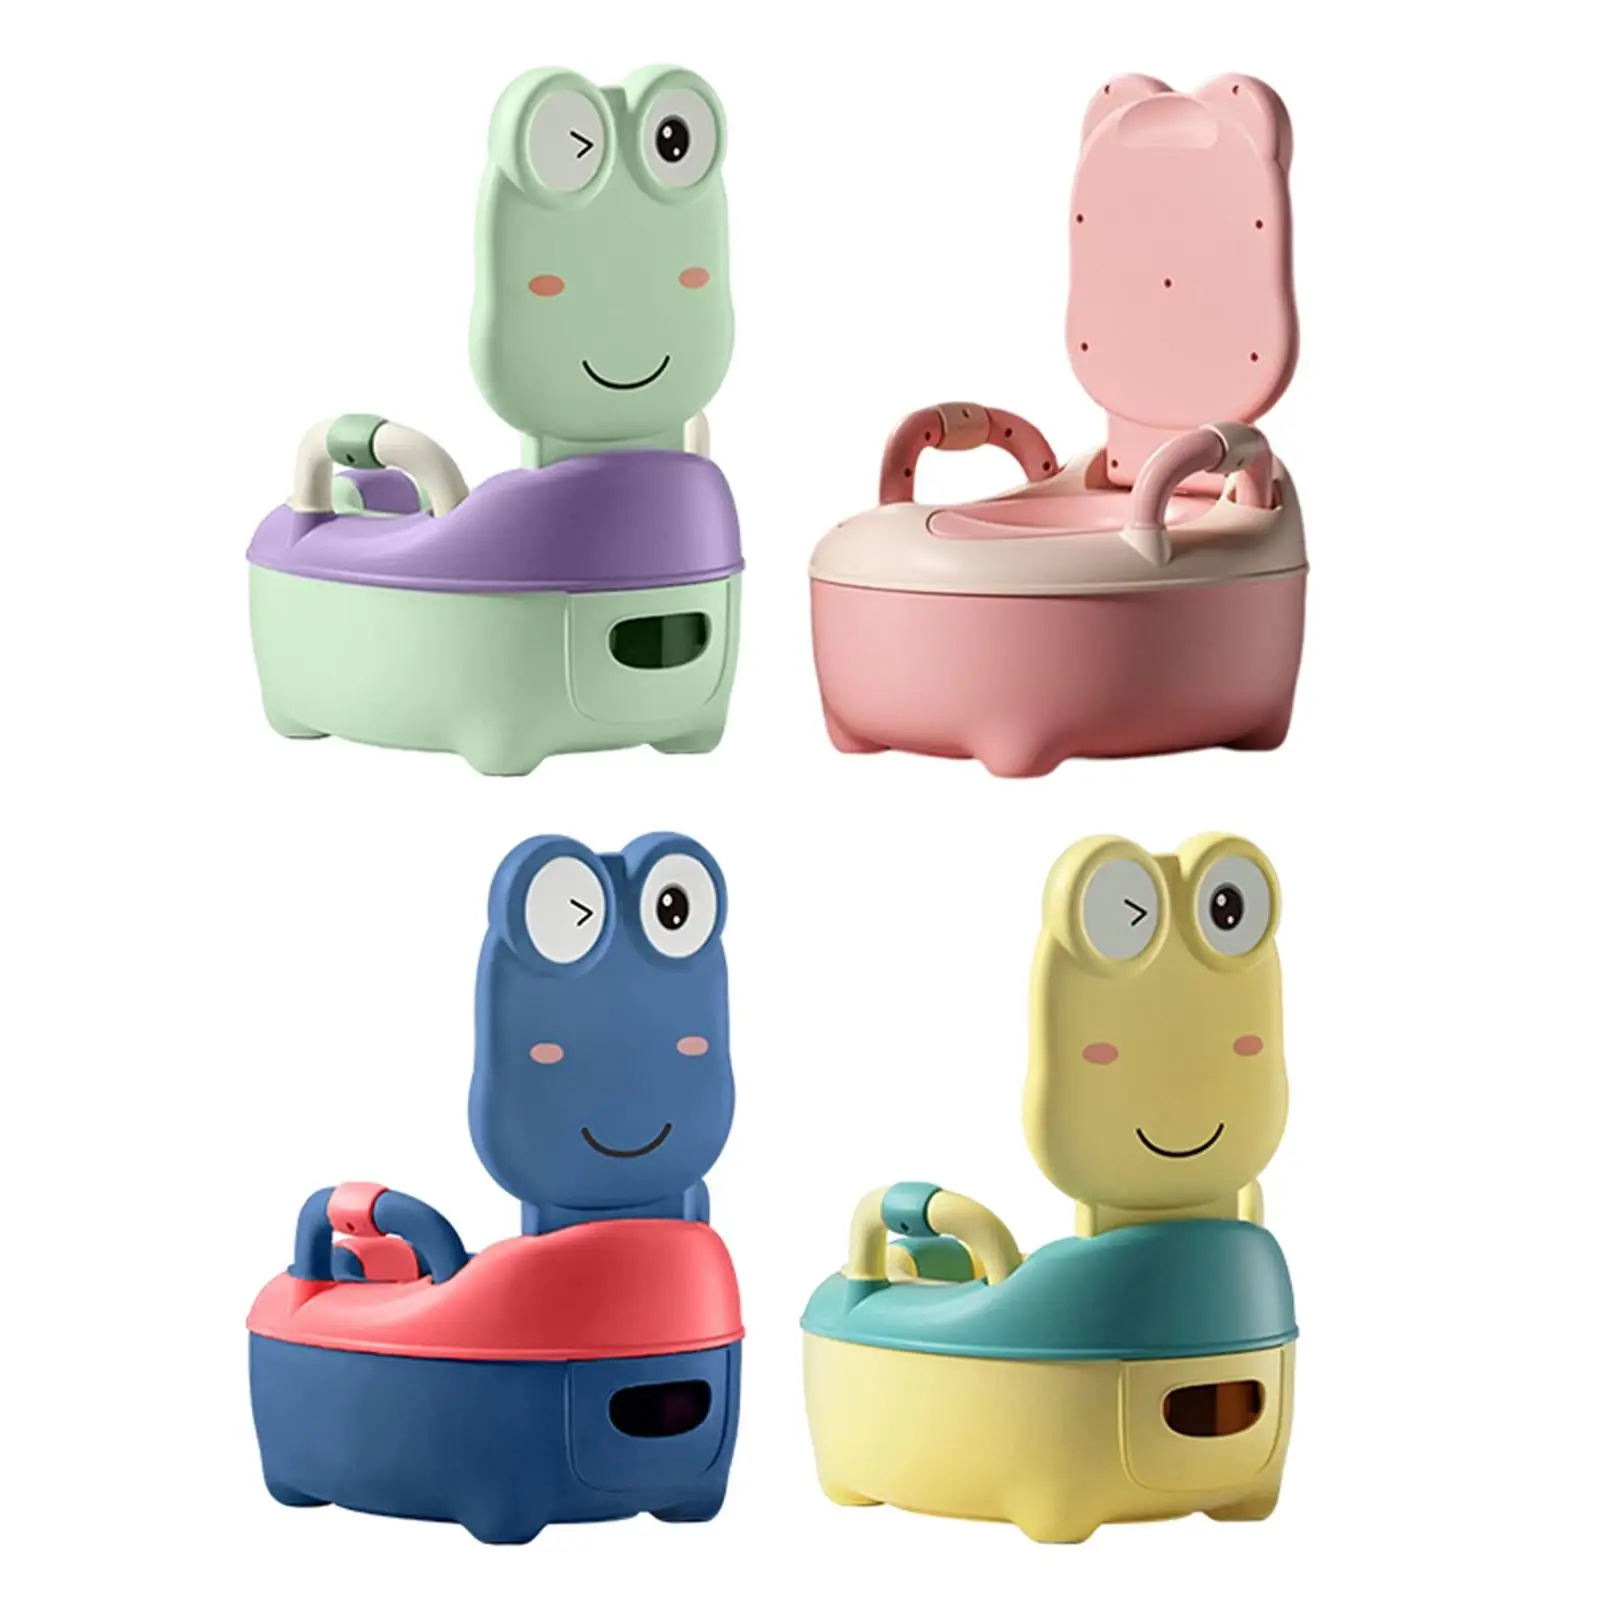 Baby Toilet Seat potty Chair Pot with Handles for Unisex Child